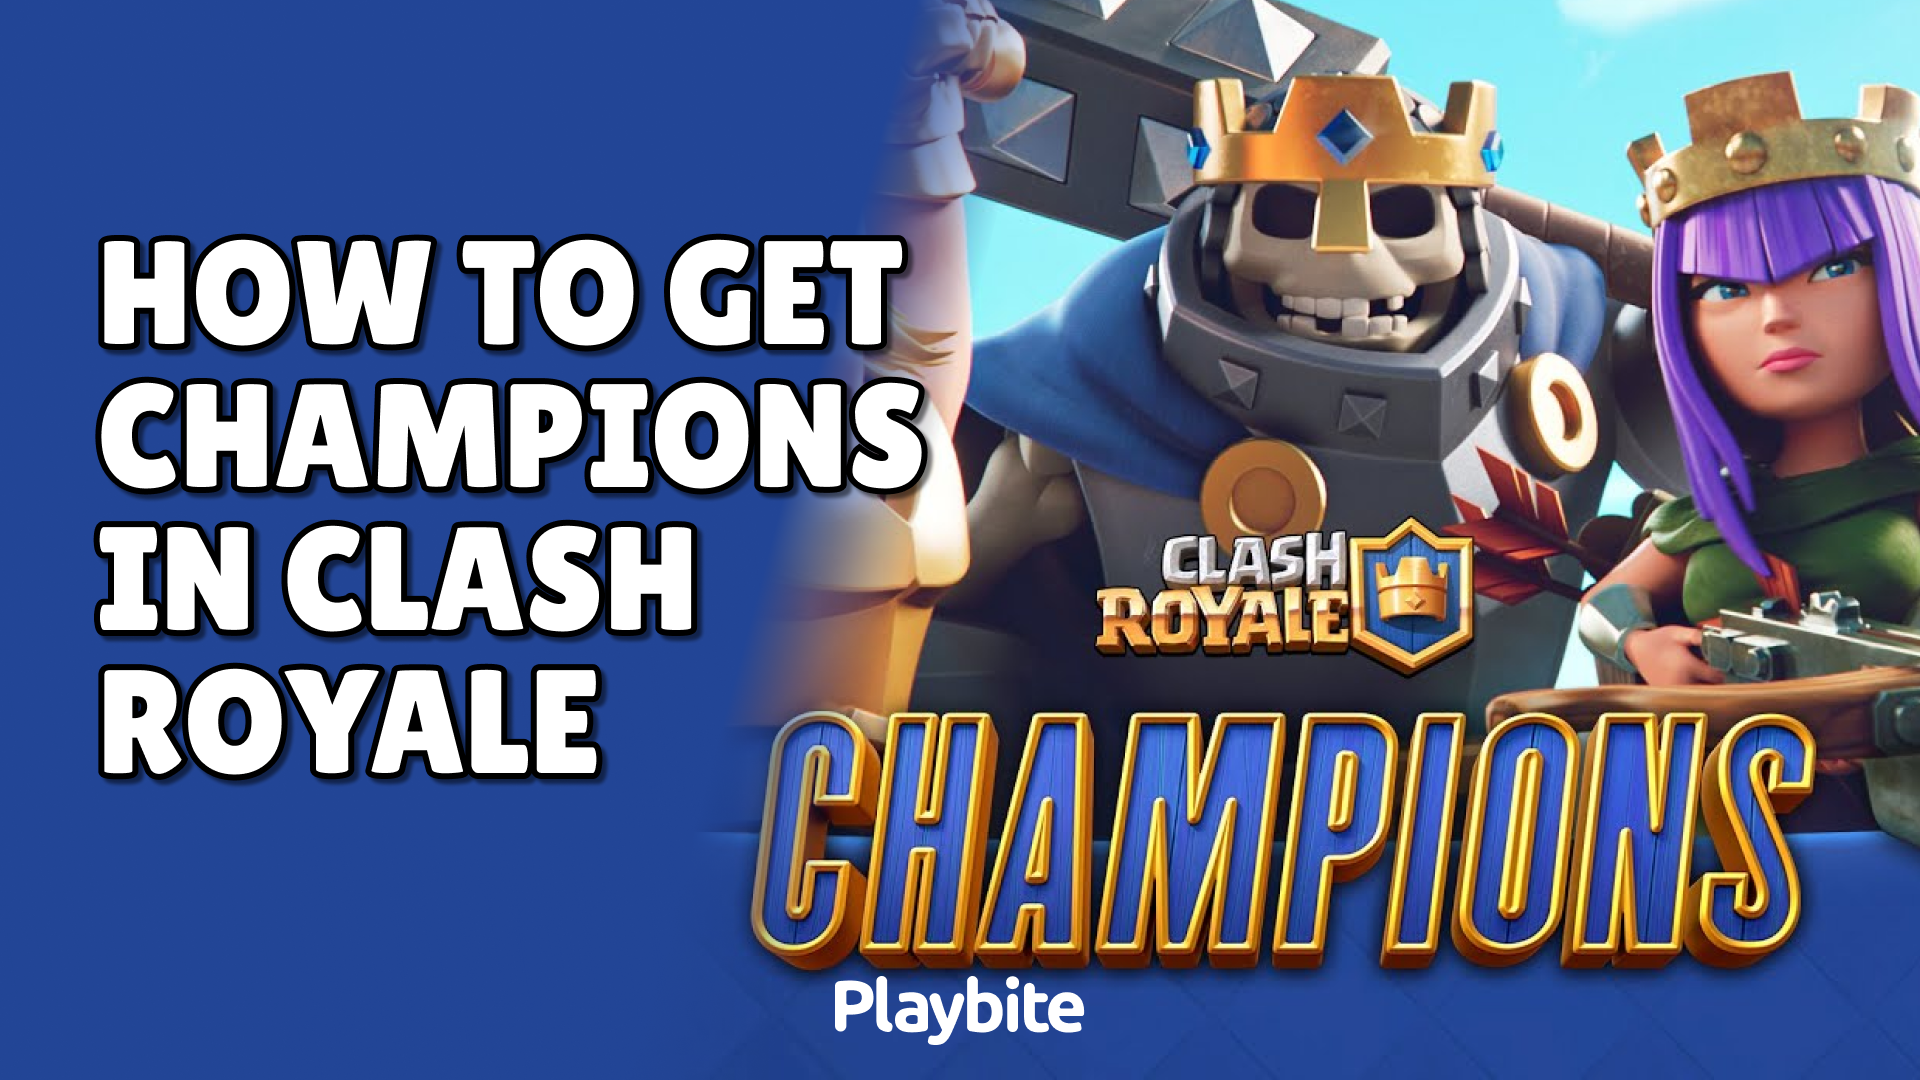 How To Get Champions In Clash Royale